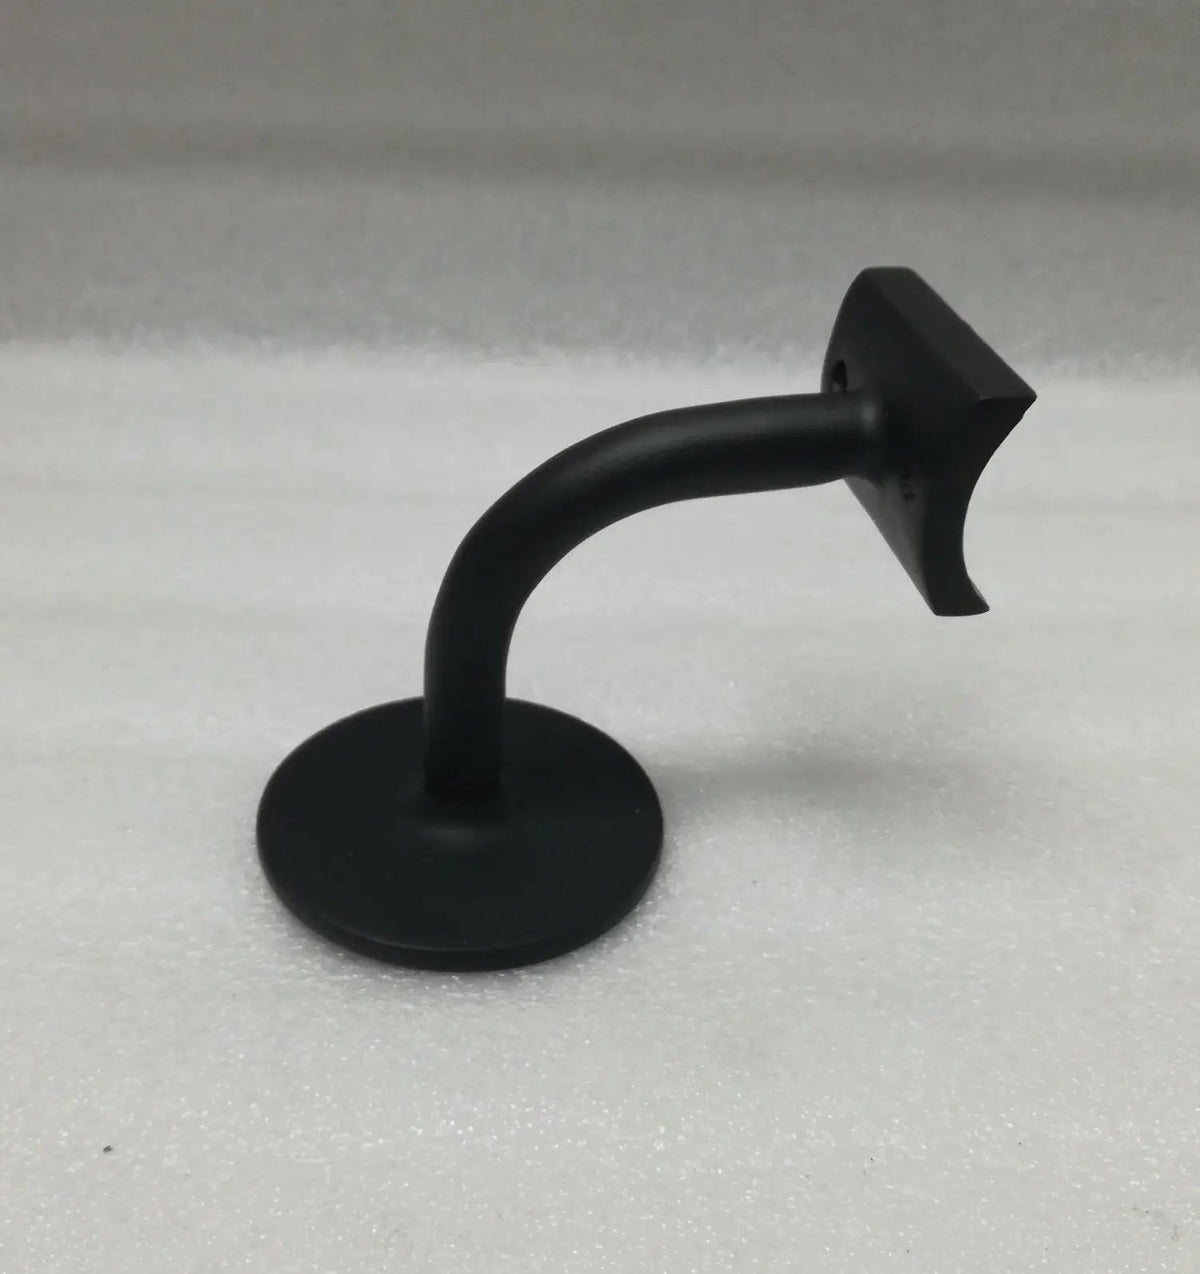 Blind-Stud Hand Rail Bracket for 2" Tubing Brackets, Components for 2" Od Tubing MatteBlack-Pleasecall Trade Diversified